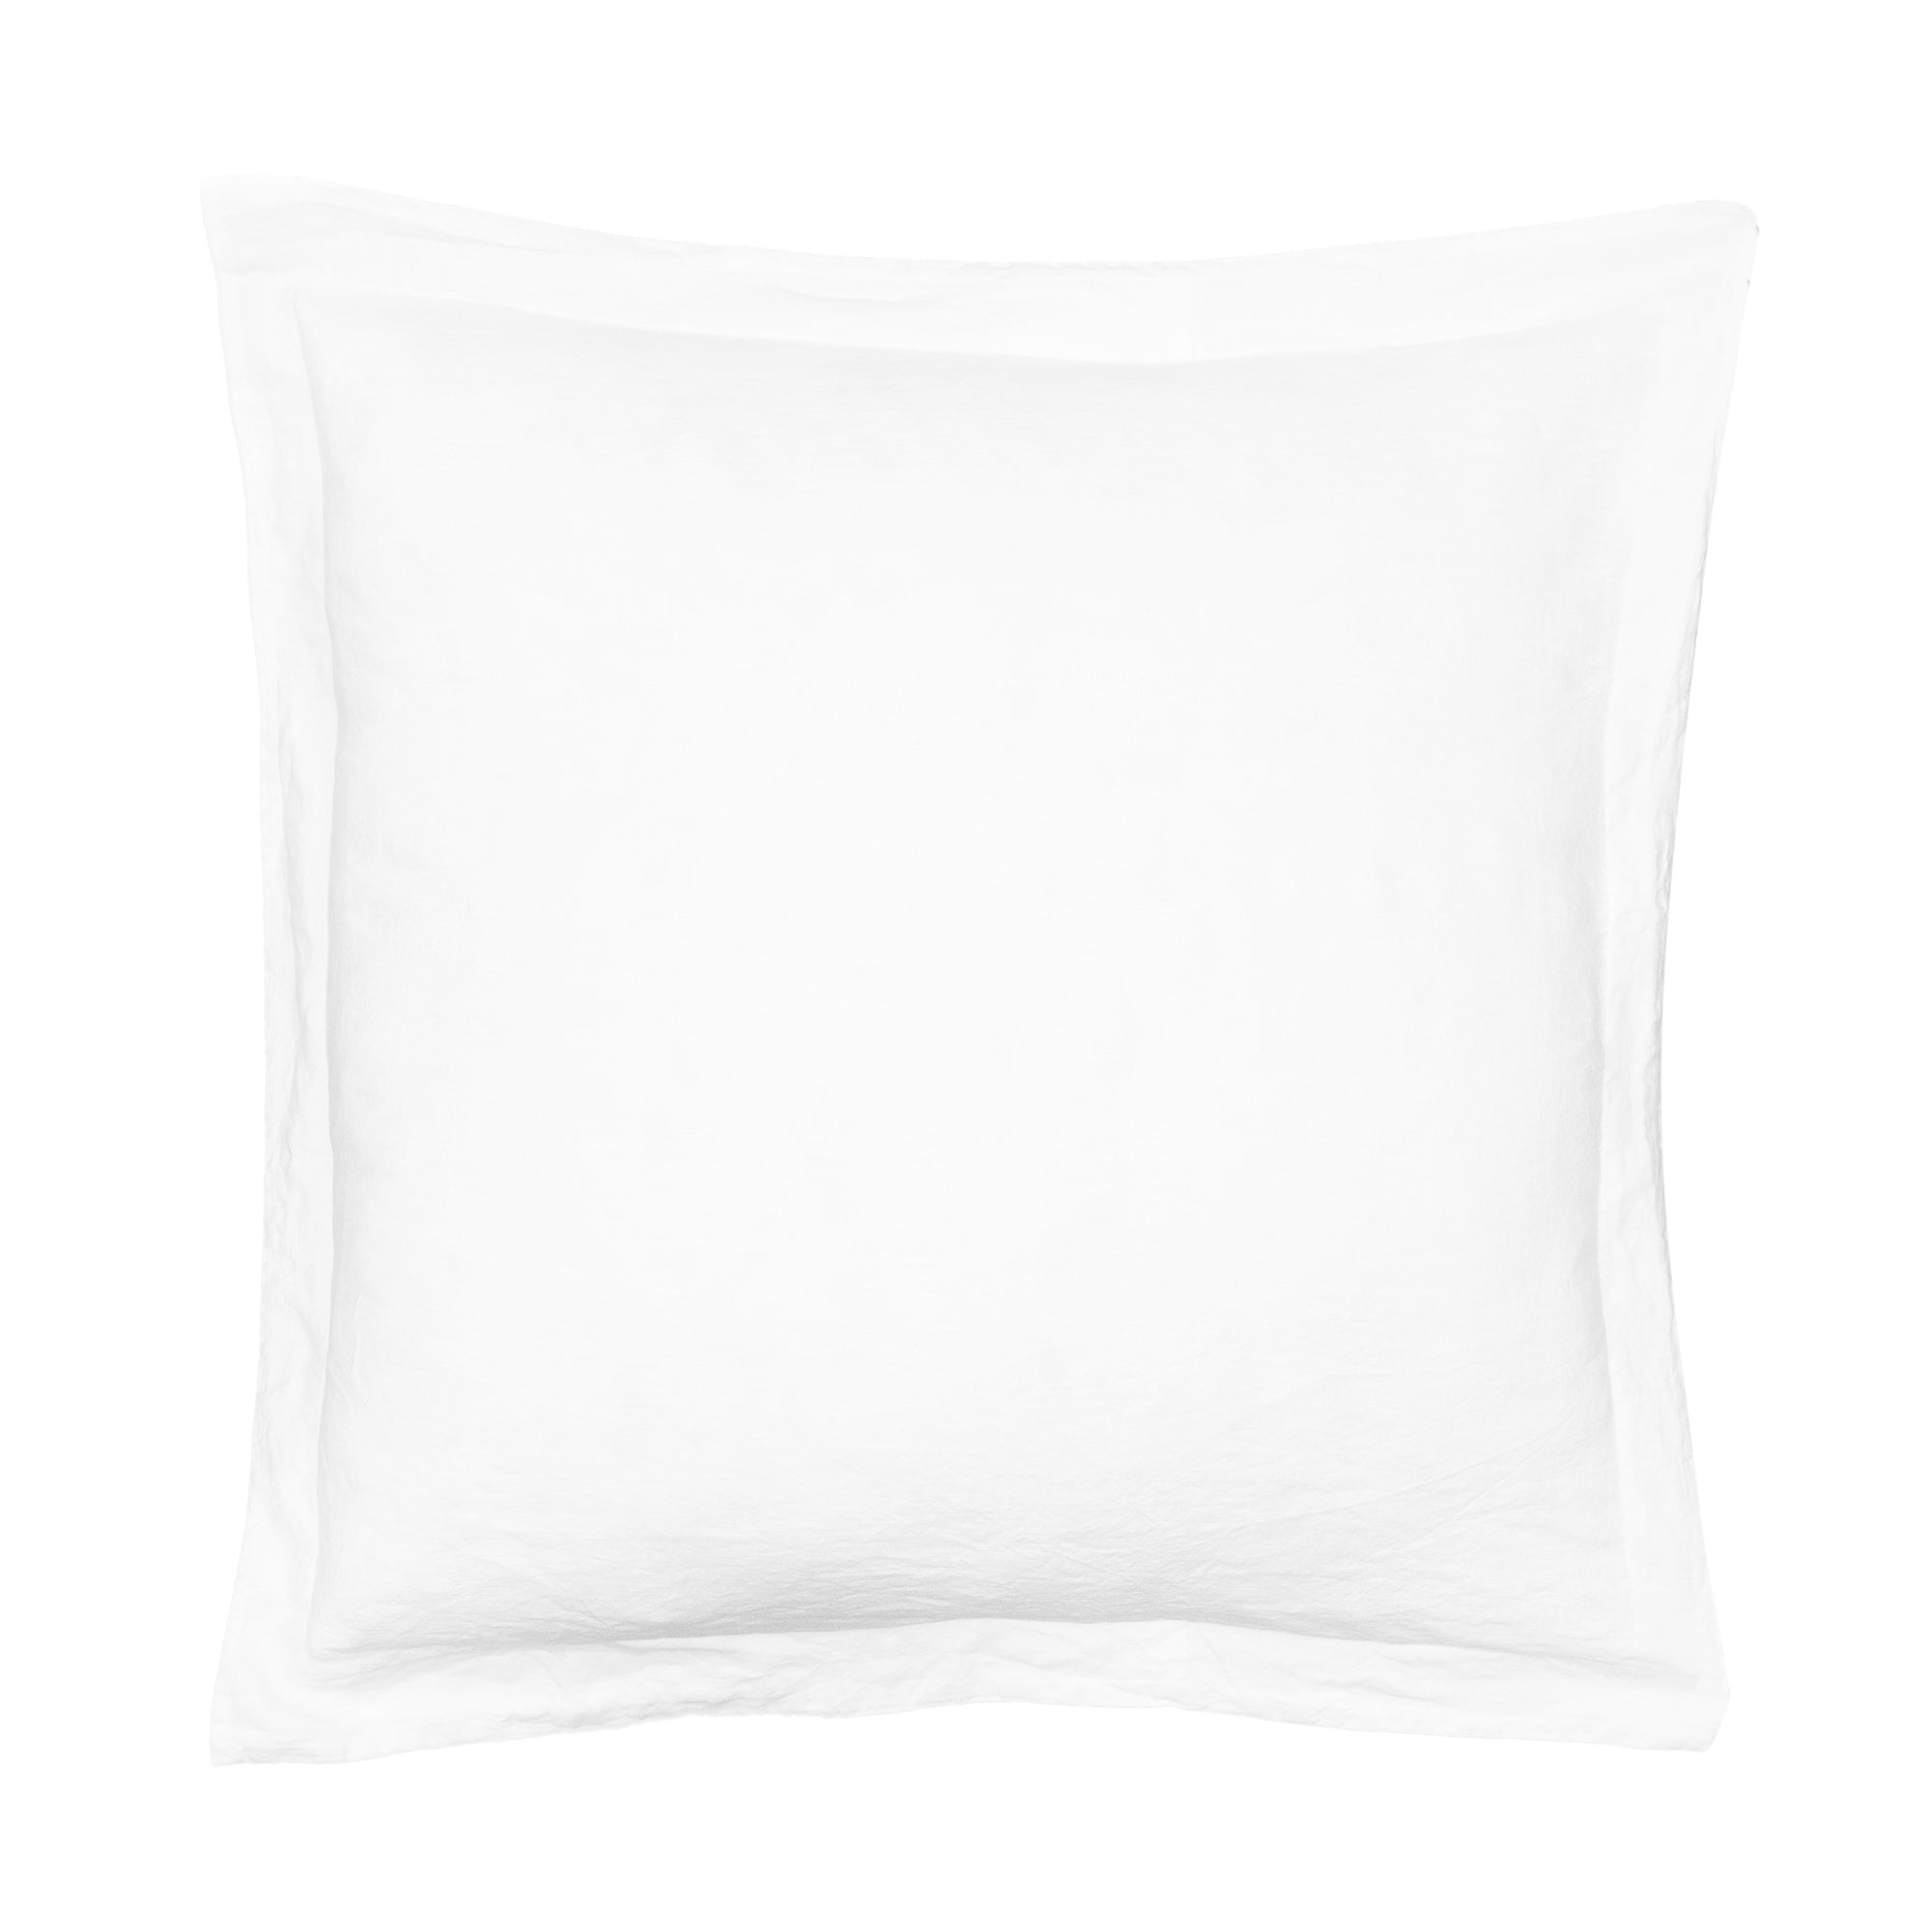 The Difference Between A Pillow Sham and a Pillowcase